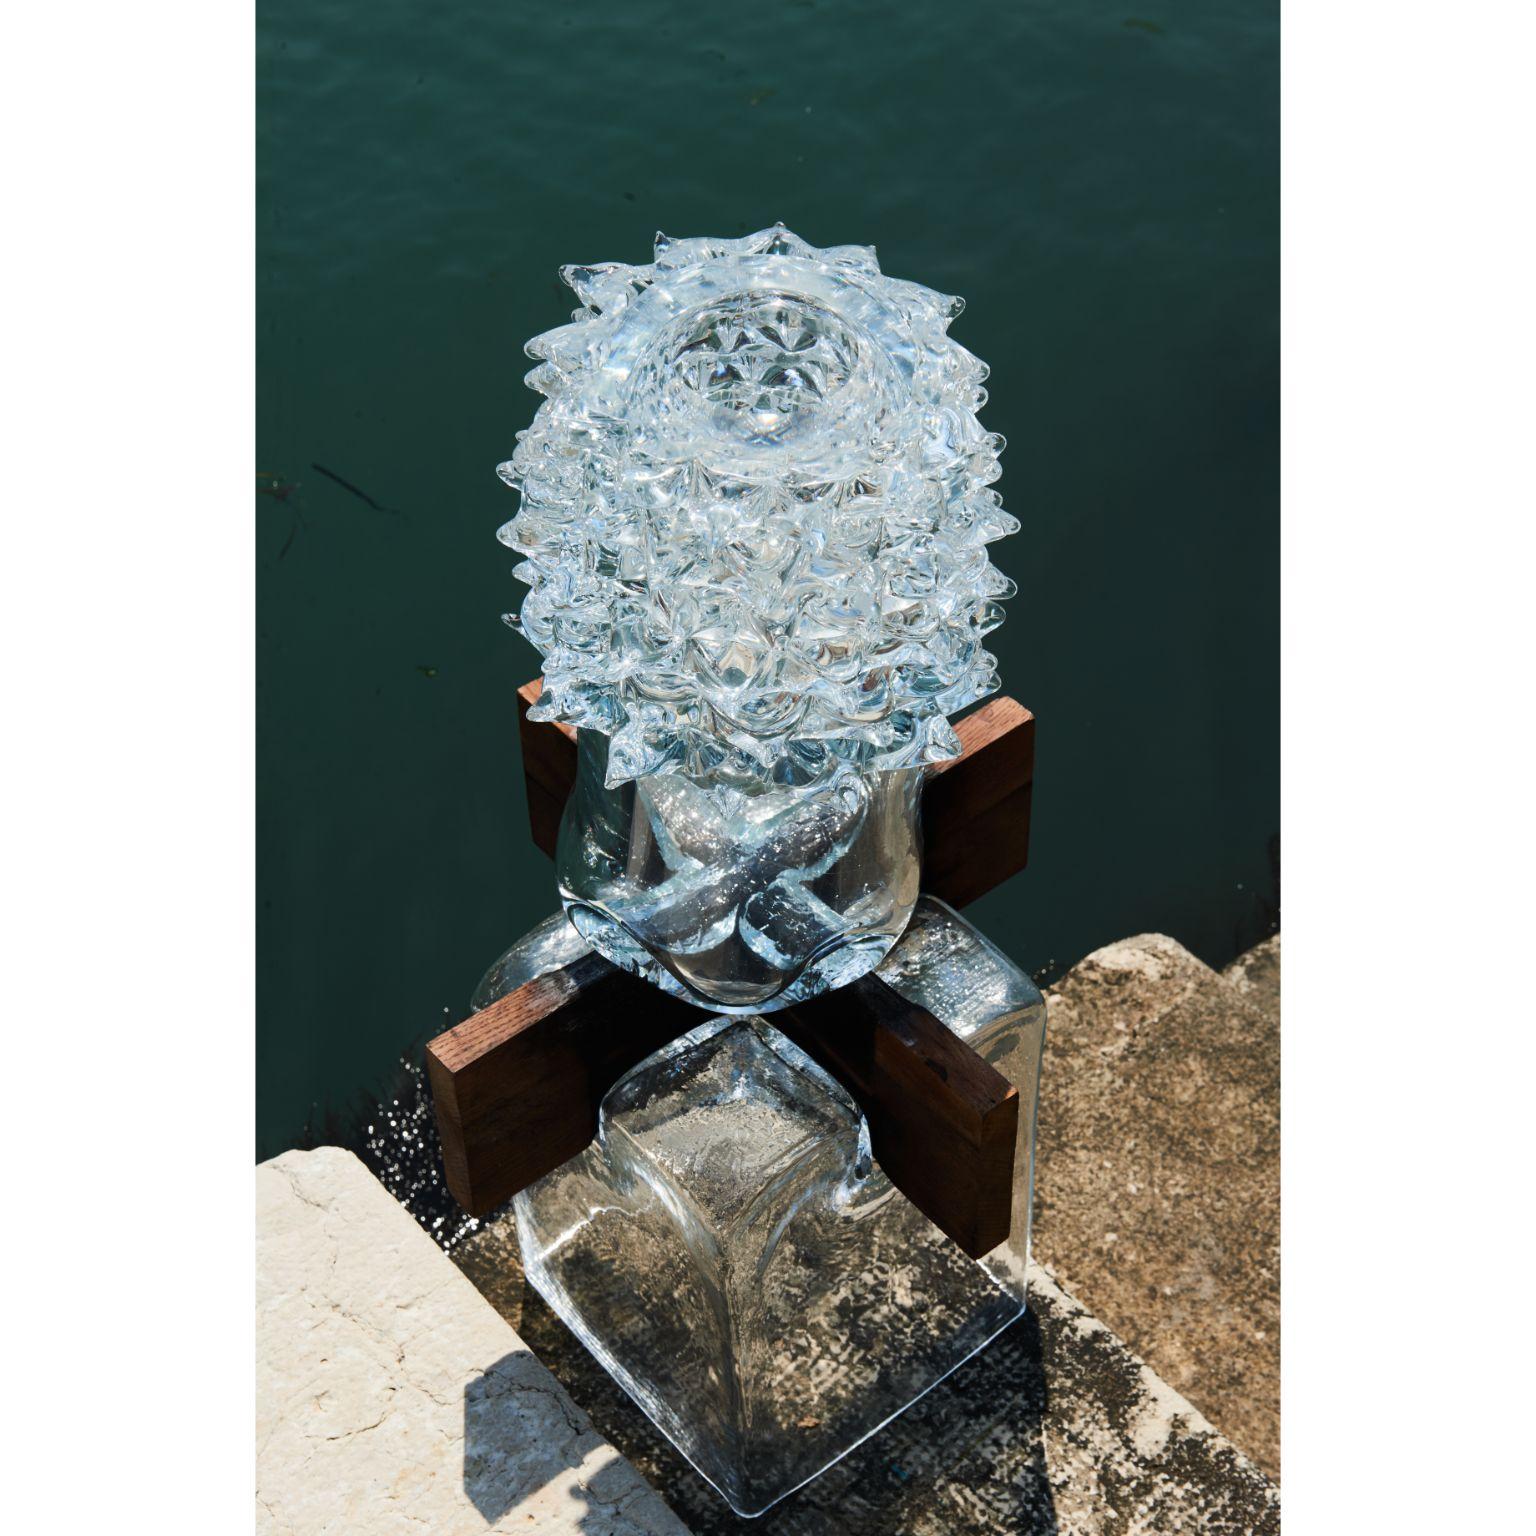 Venice Collection Vase by Alexey Drozhdin
Dimensions: D 25 x W 25 x H 72 cm. 
Materials: glass, oak shape.

A young designer and artist Alexey Drozhdin creates extraordinary decorative glass objects. the designer became a finalist of the